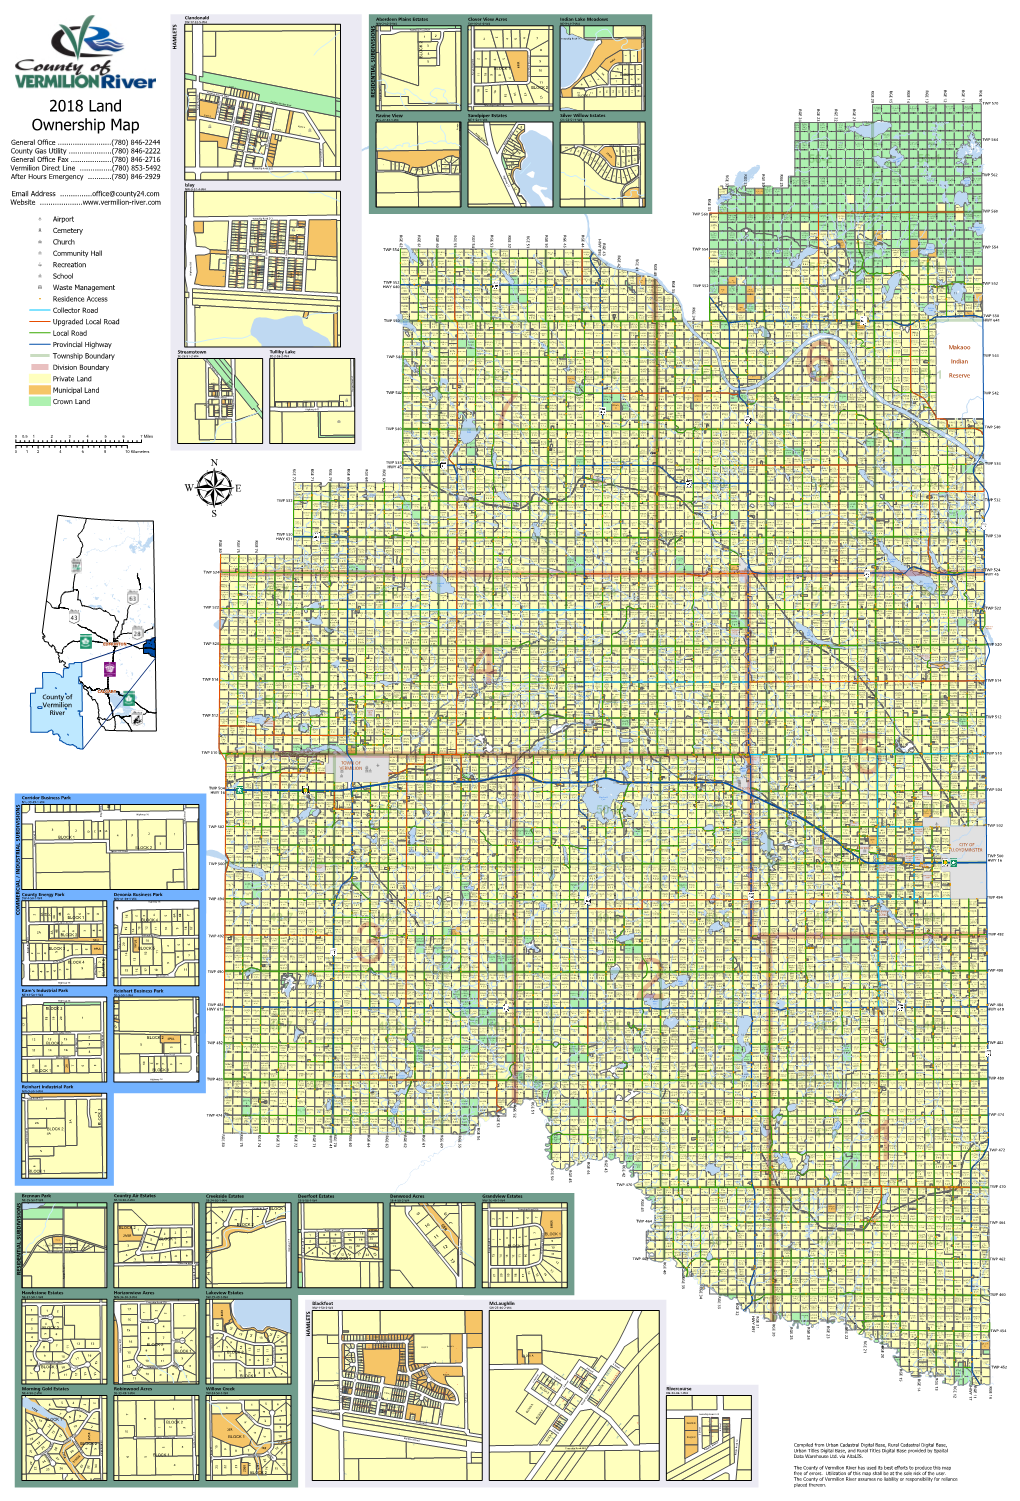 County of Vermilion River Has Used Its Best Efforts to Produce This Map 20ER BLOCK 2 4802 Free of Errors